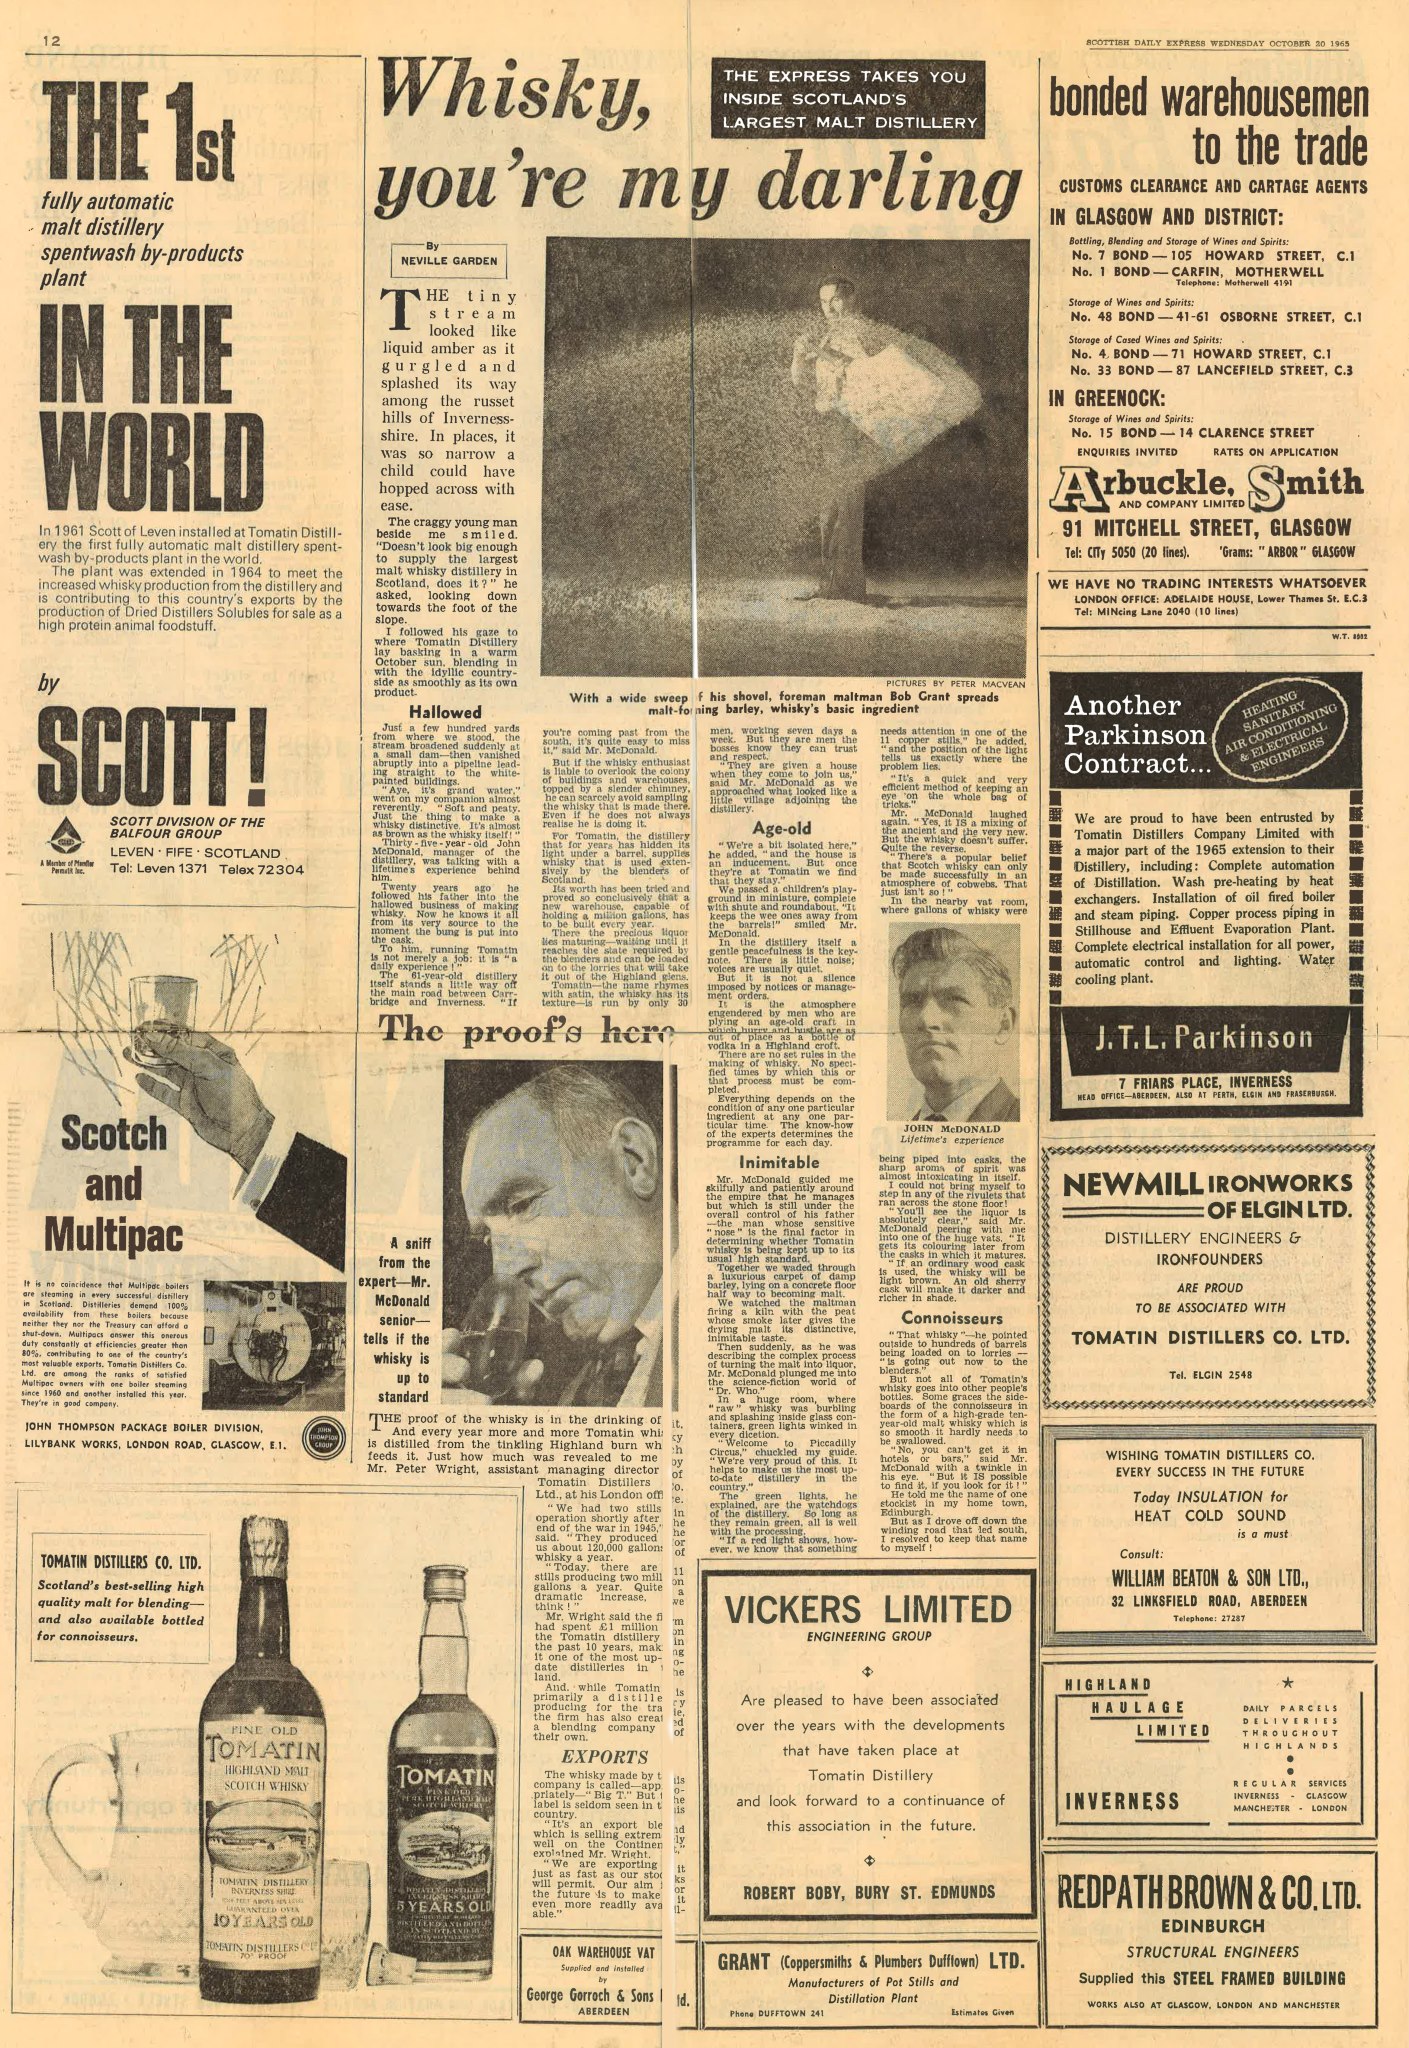 Check out this article in the Daily Express from 1965 : Tomatin